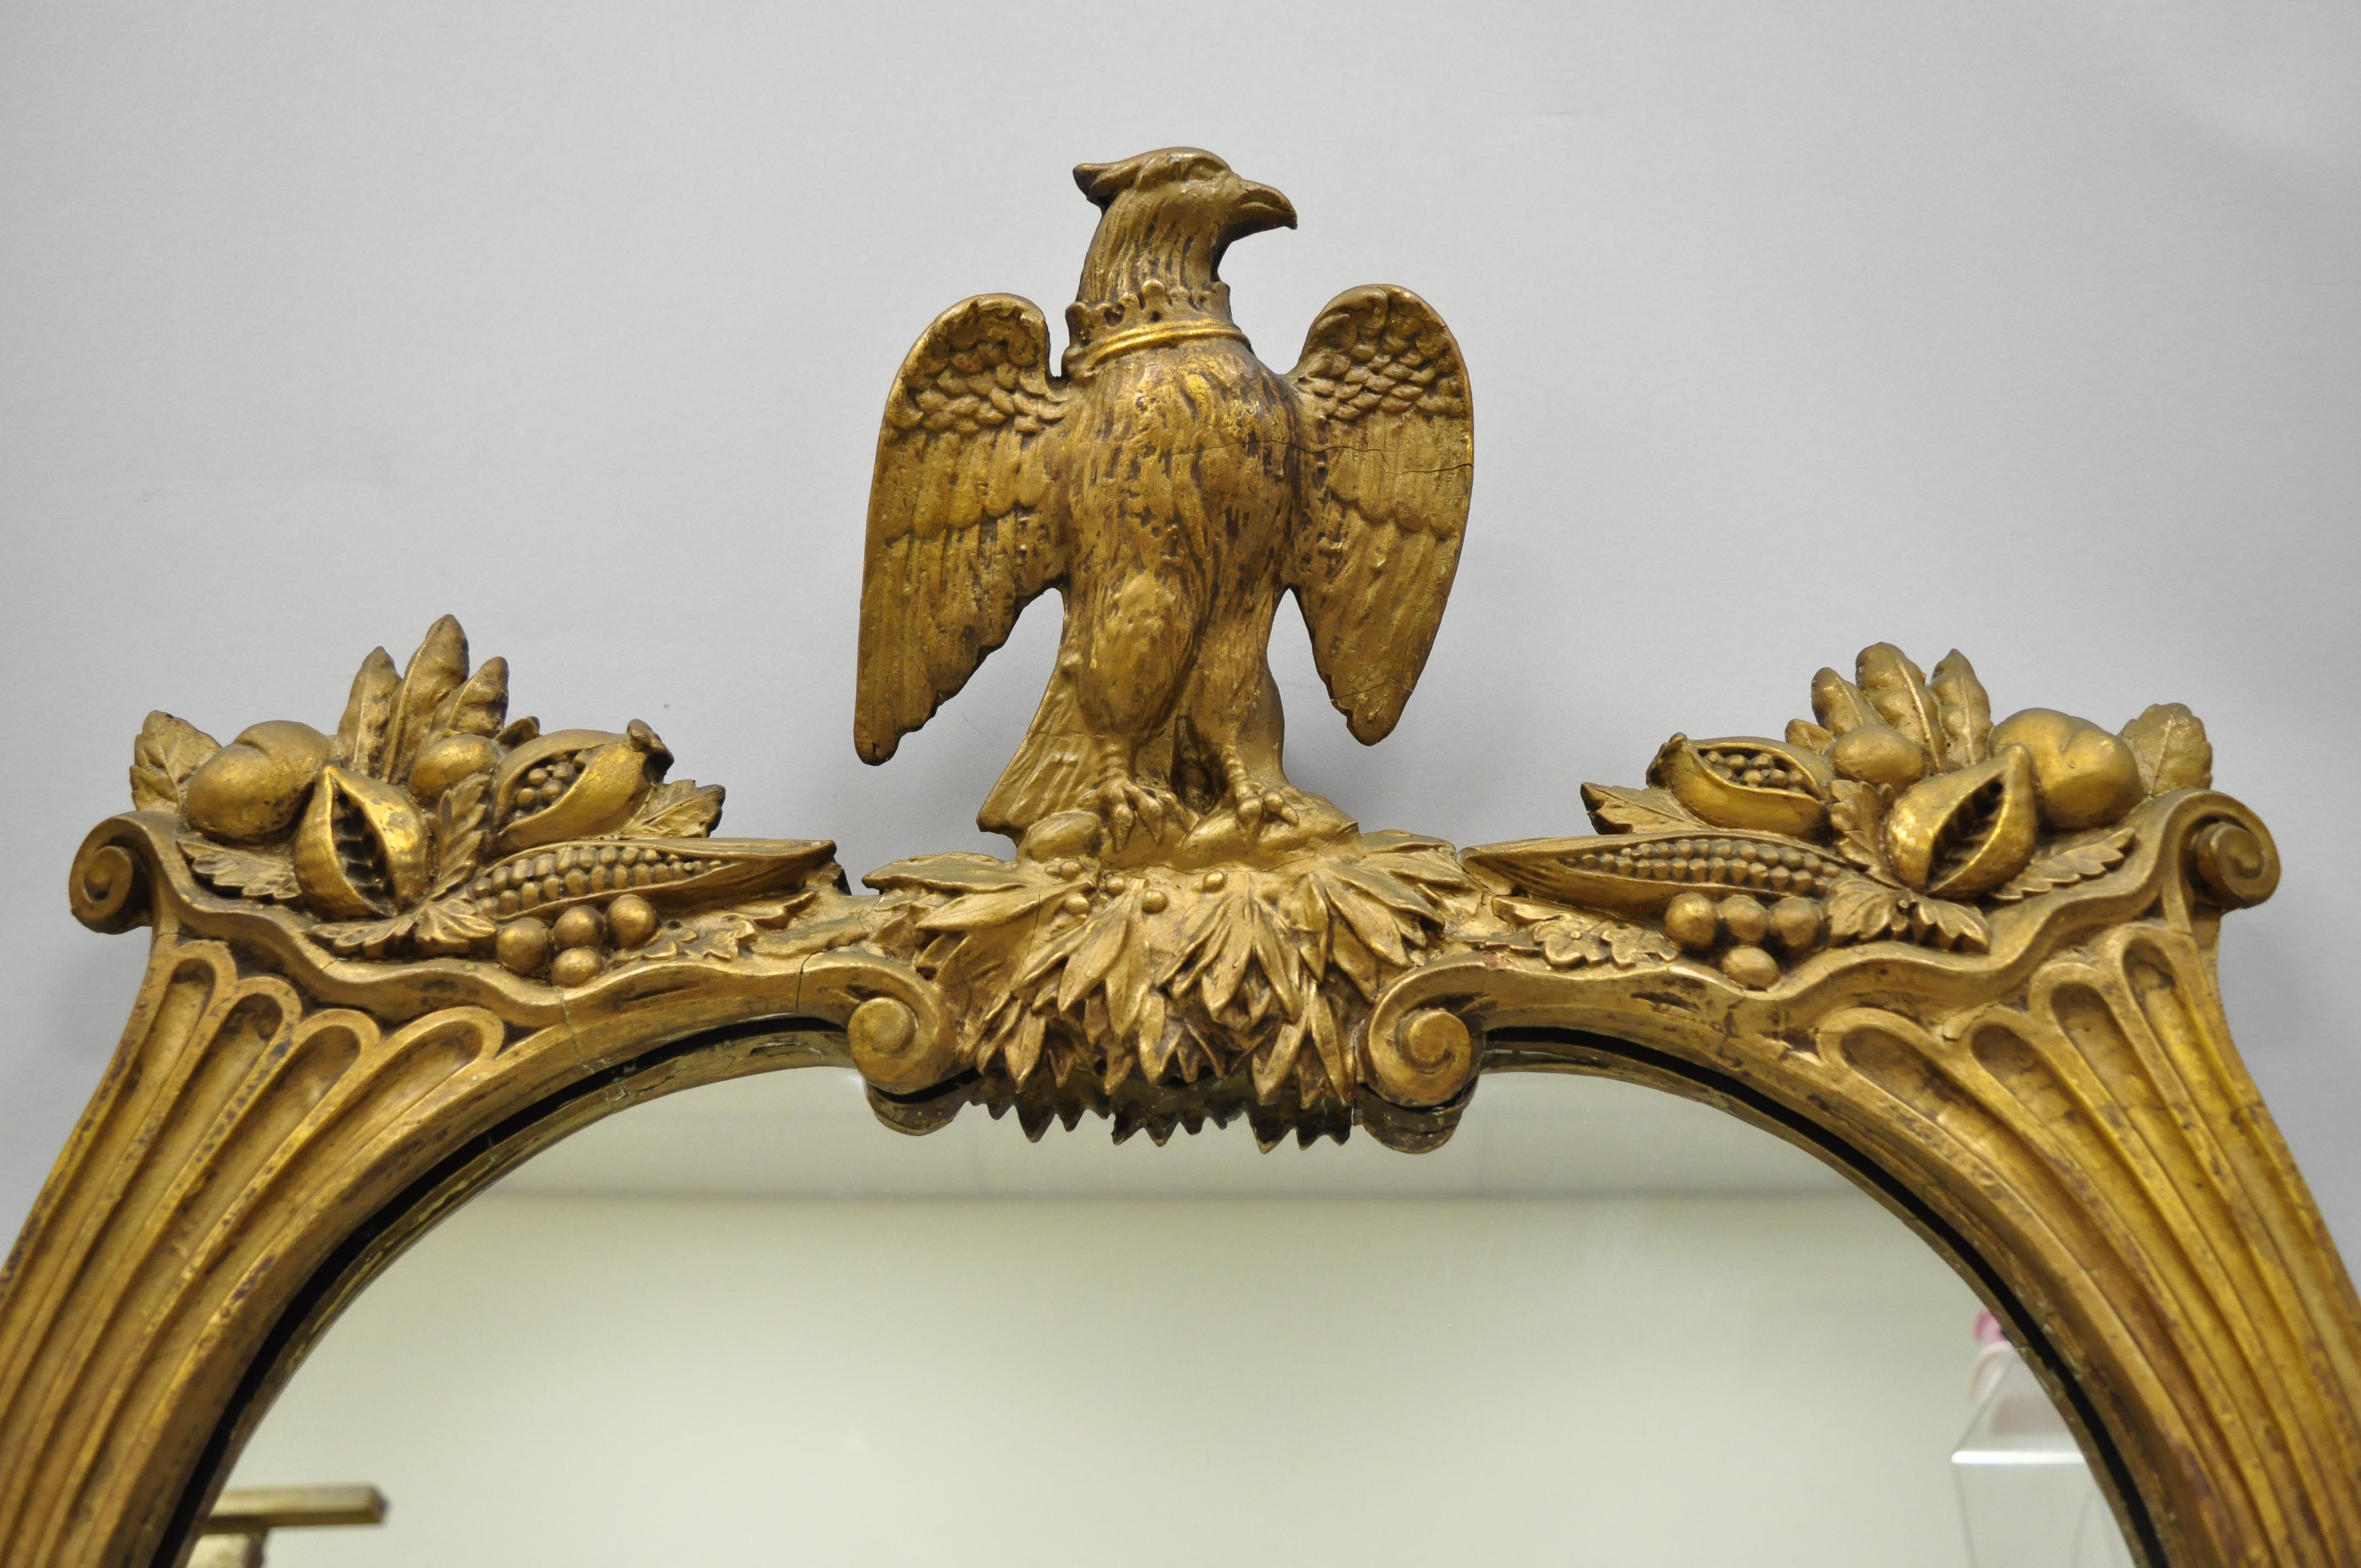 Antique gold gilt gesso federal style wall mirror with eagle and cornucopia. Item features gilt gesso eagle crest and cornucopia frame, very nice antique item, circa 1900. Measurements: 27